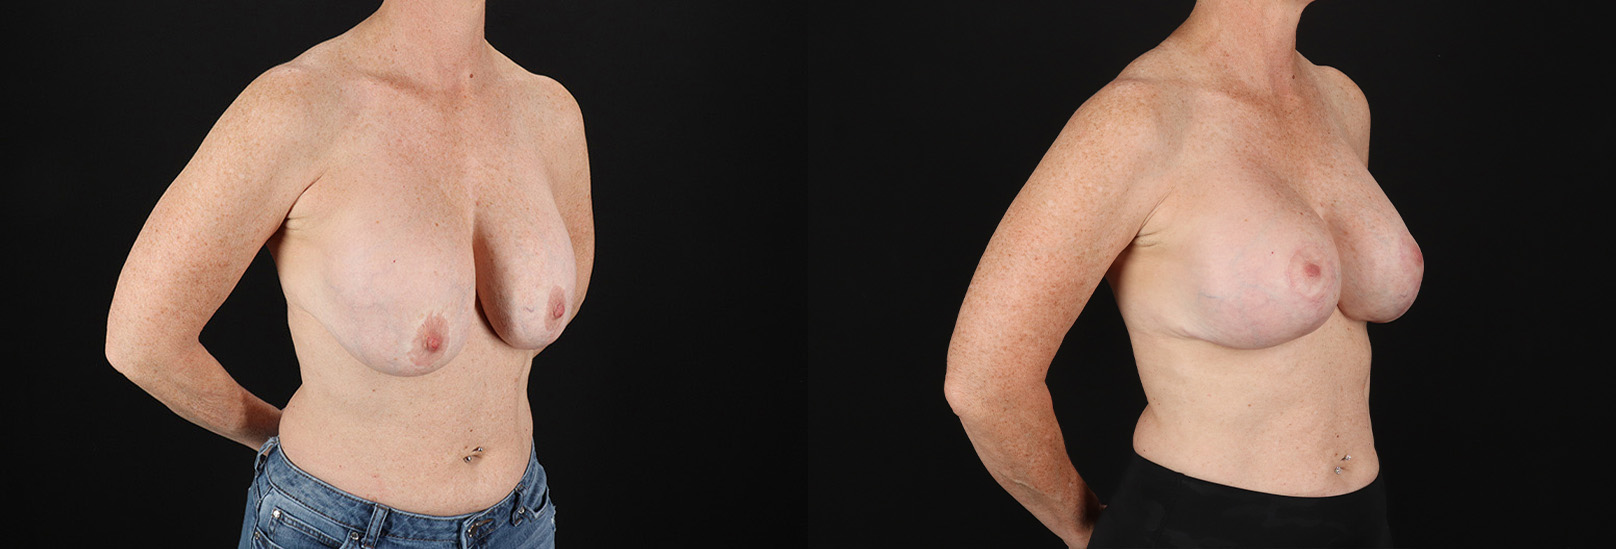 Revision Breast Surgery before and after photo by Dr. Erika A. Sato in Houston, TX